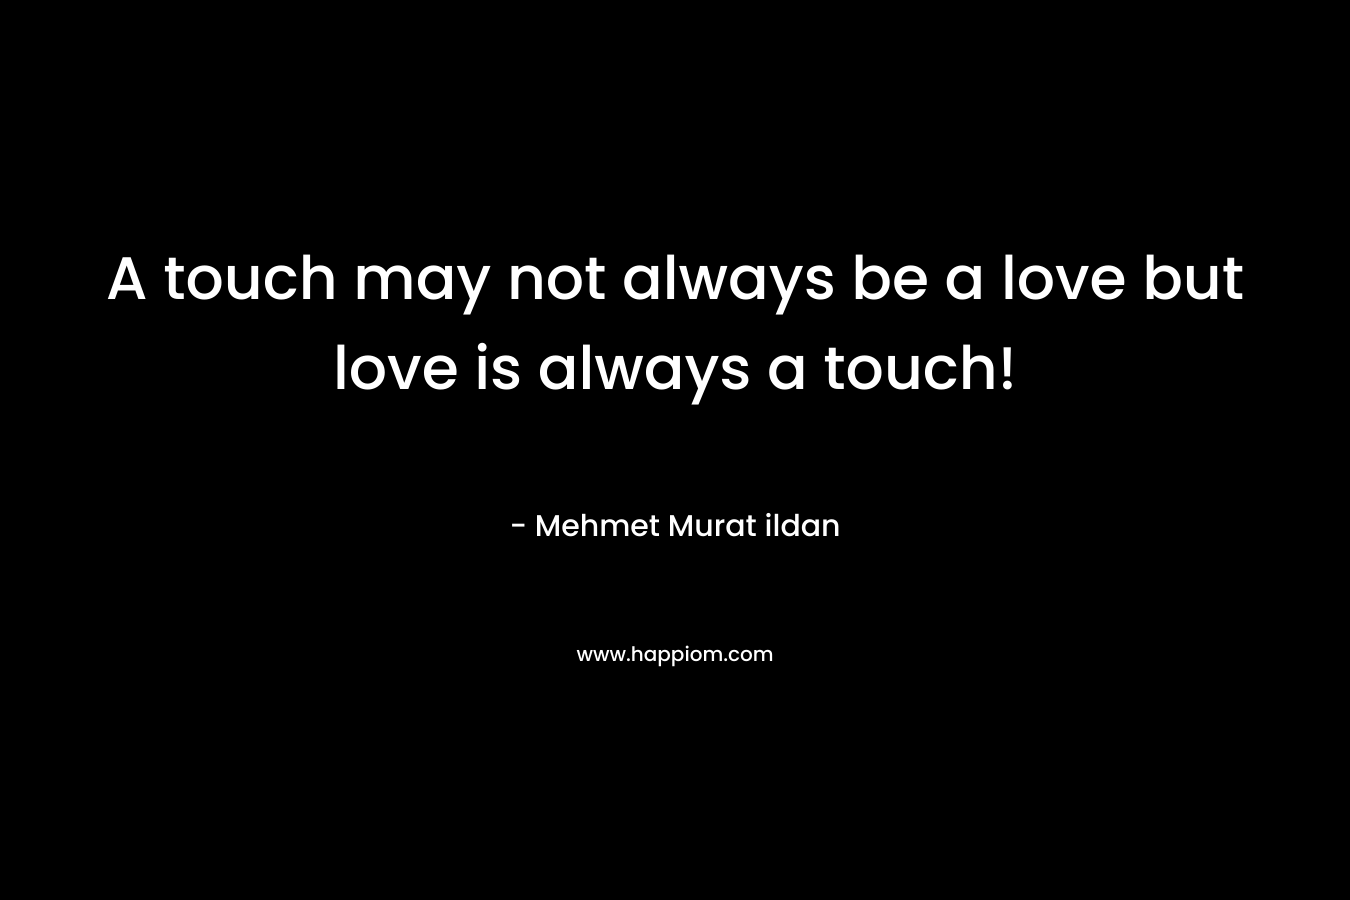 A touch may not always be a love but love is always a touch!